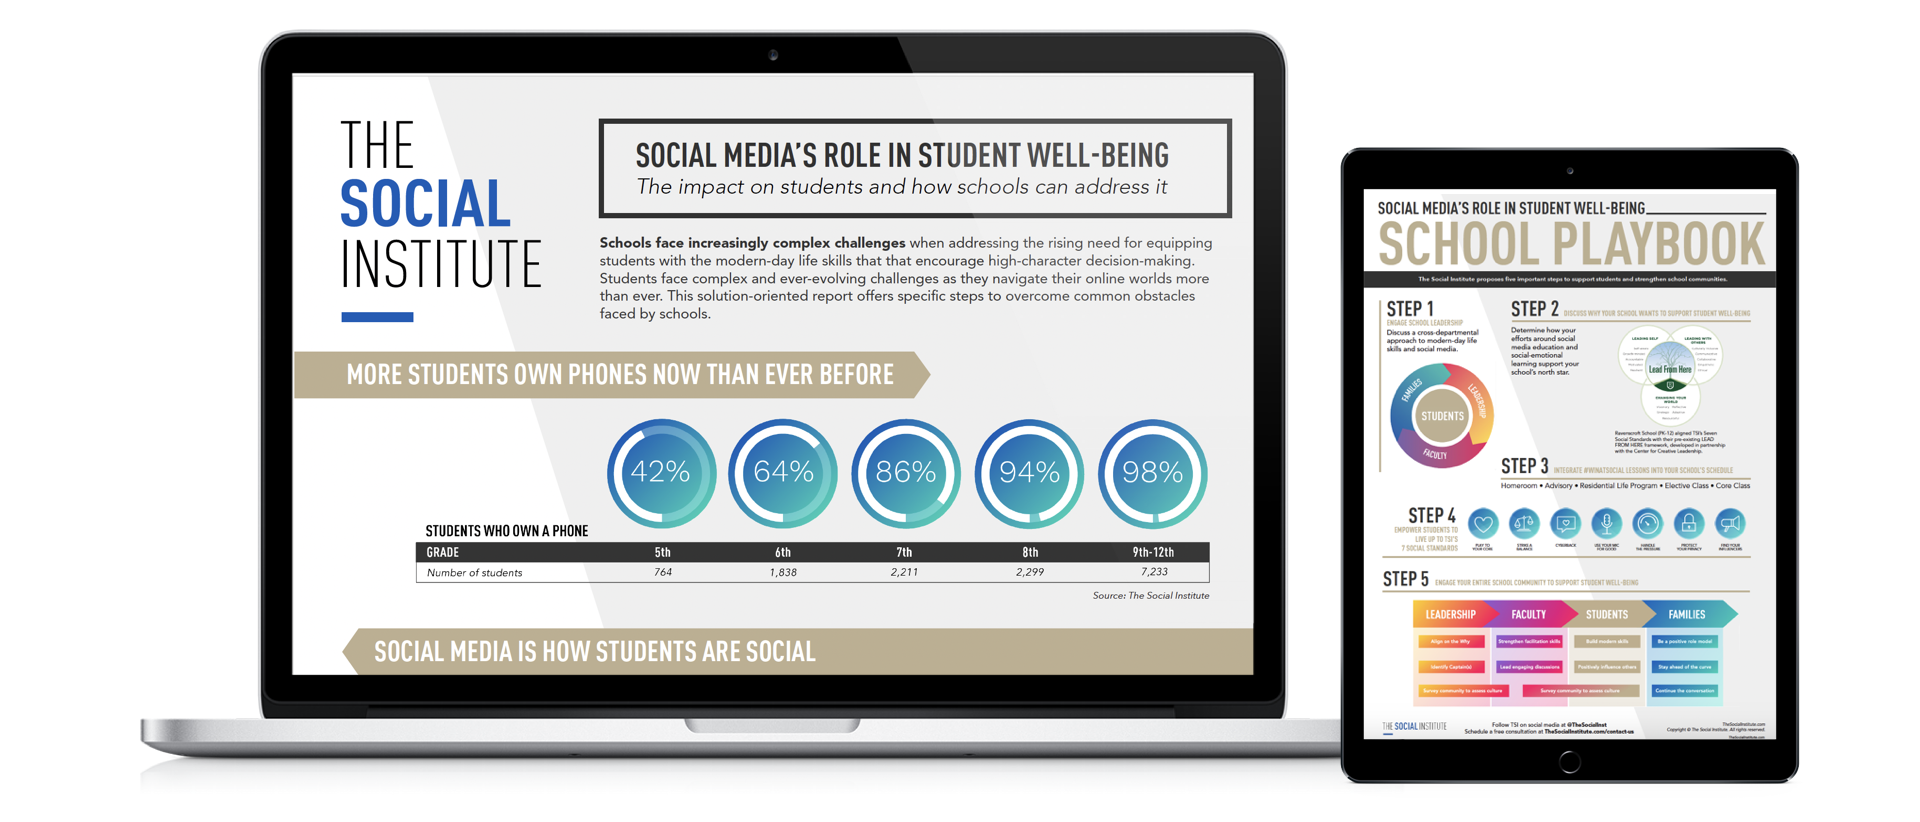 Social media's role in student well-being